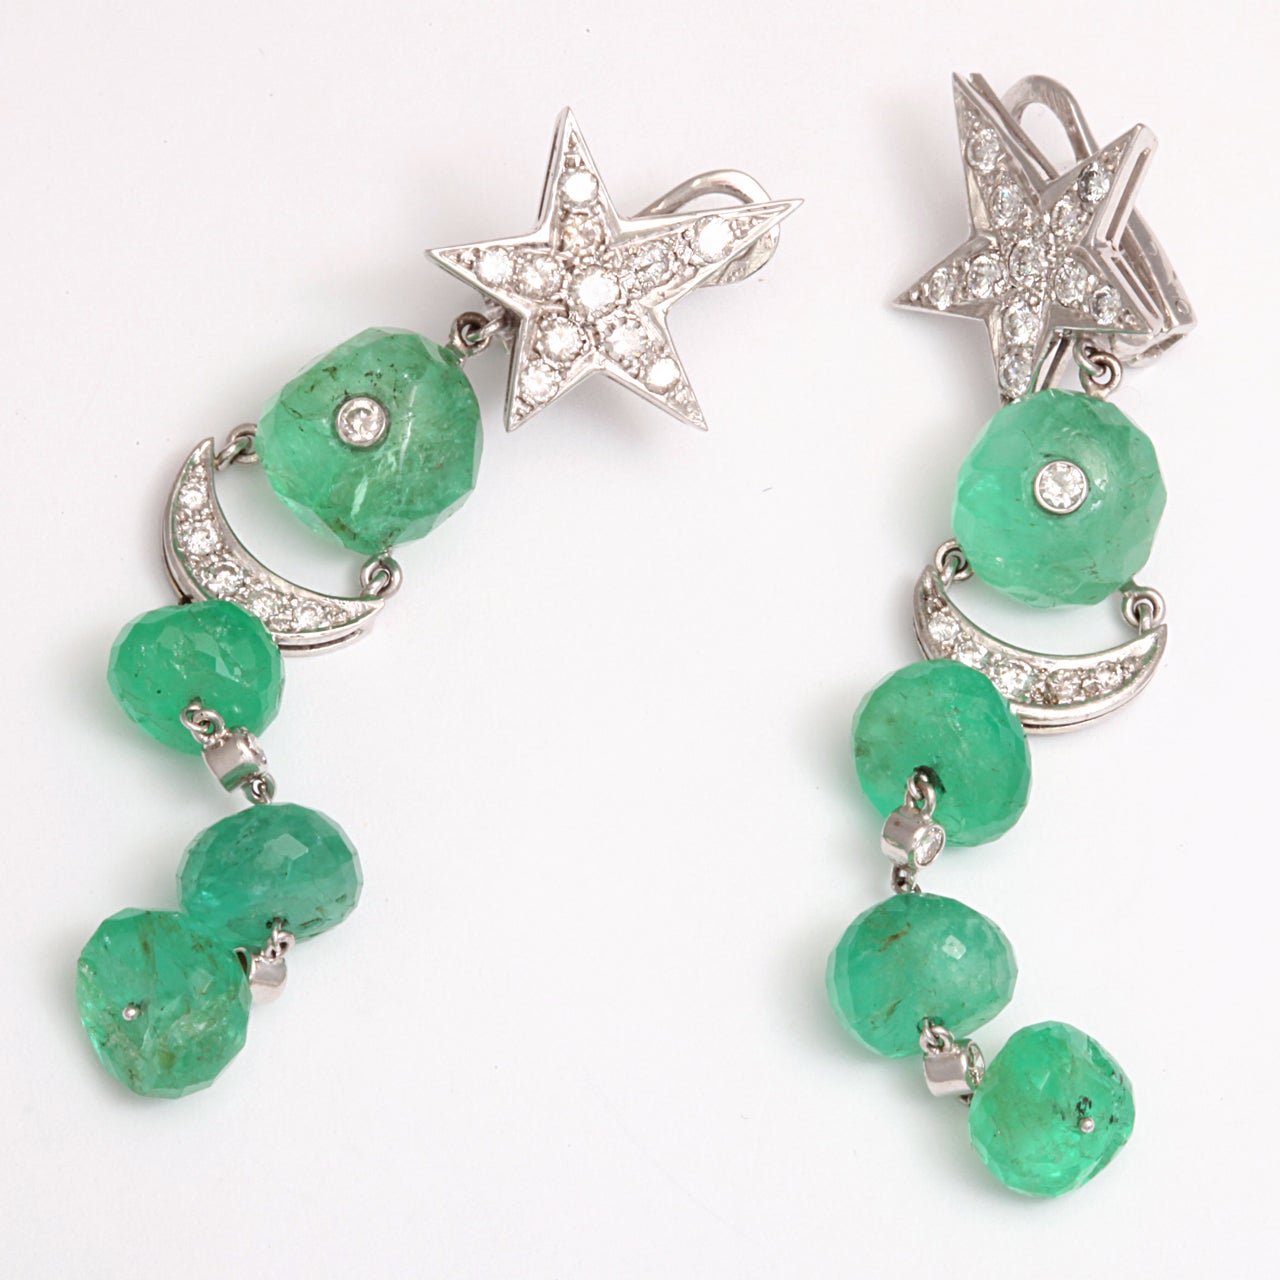 A fantastic pair of white gold earrings with faceted emeralds hanging from diamond encrusted moon and stars. French hallmarks